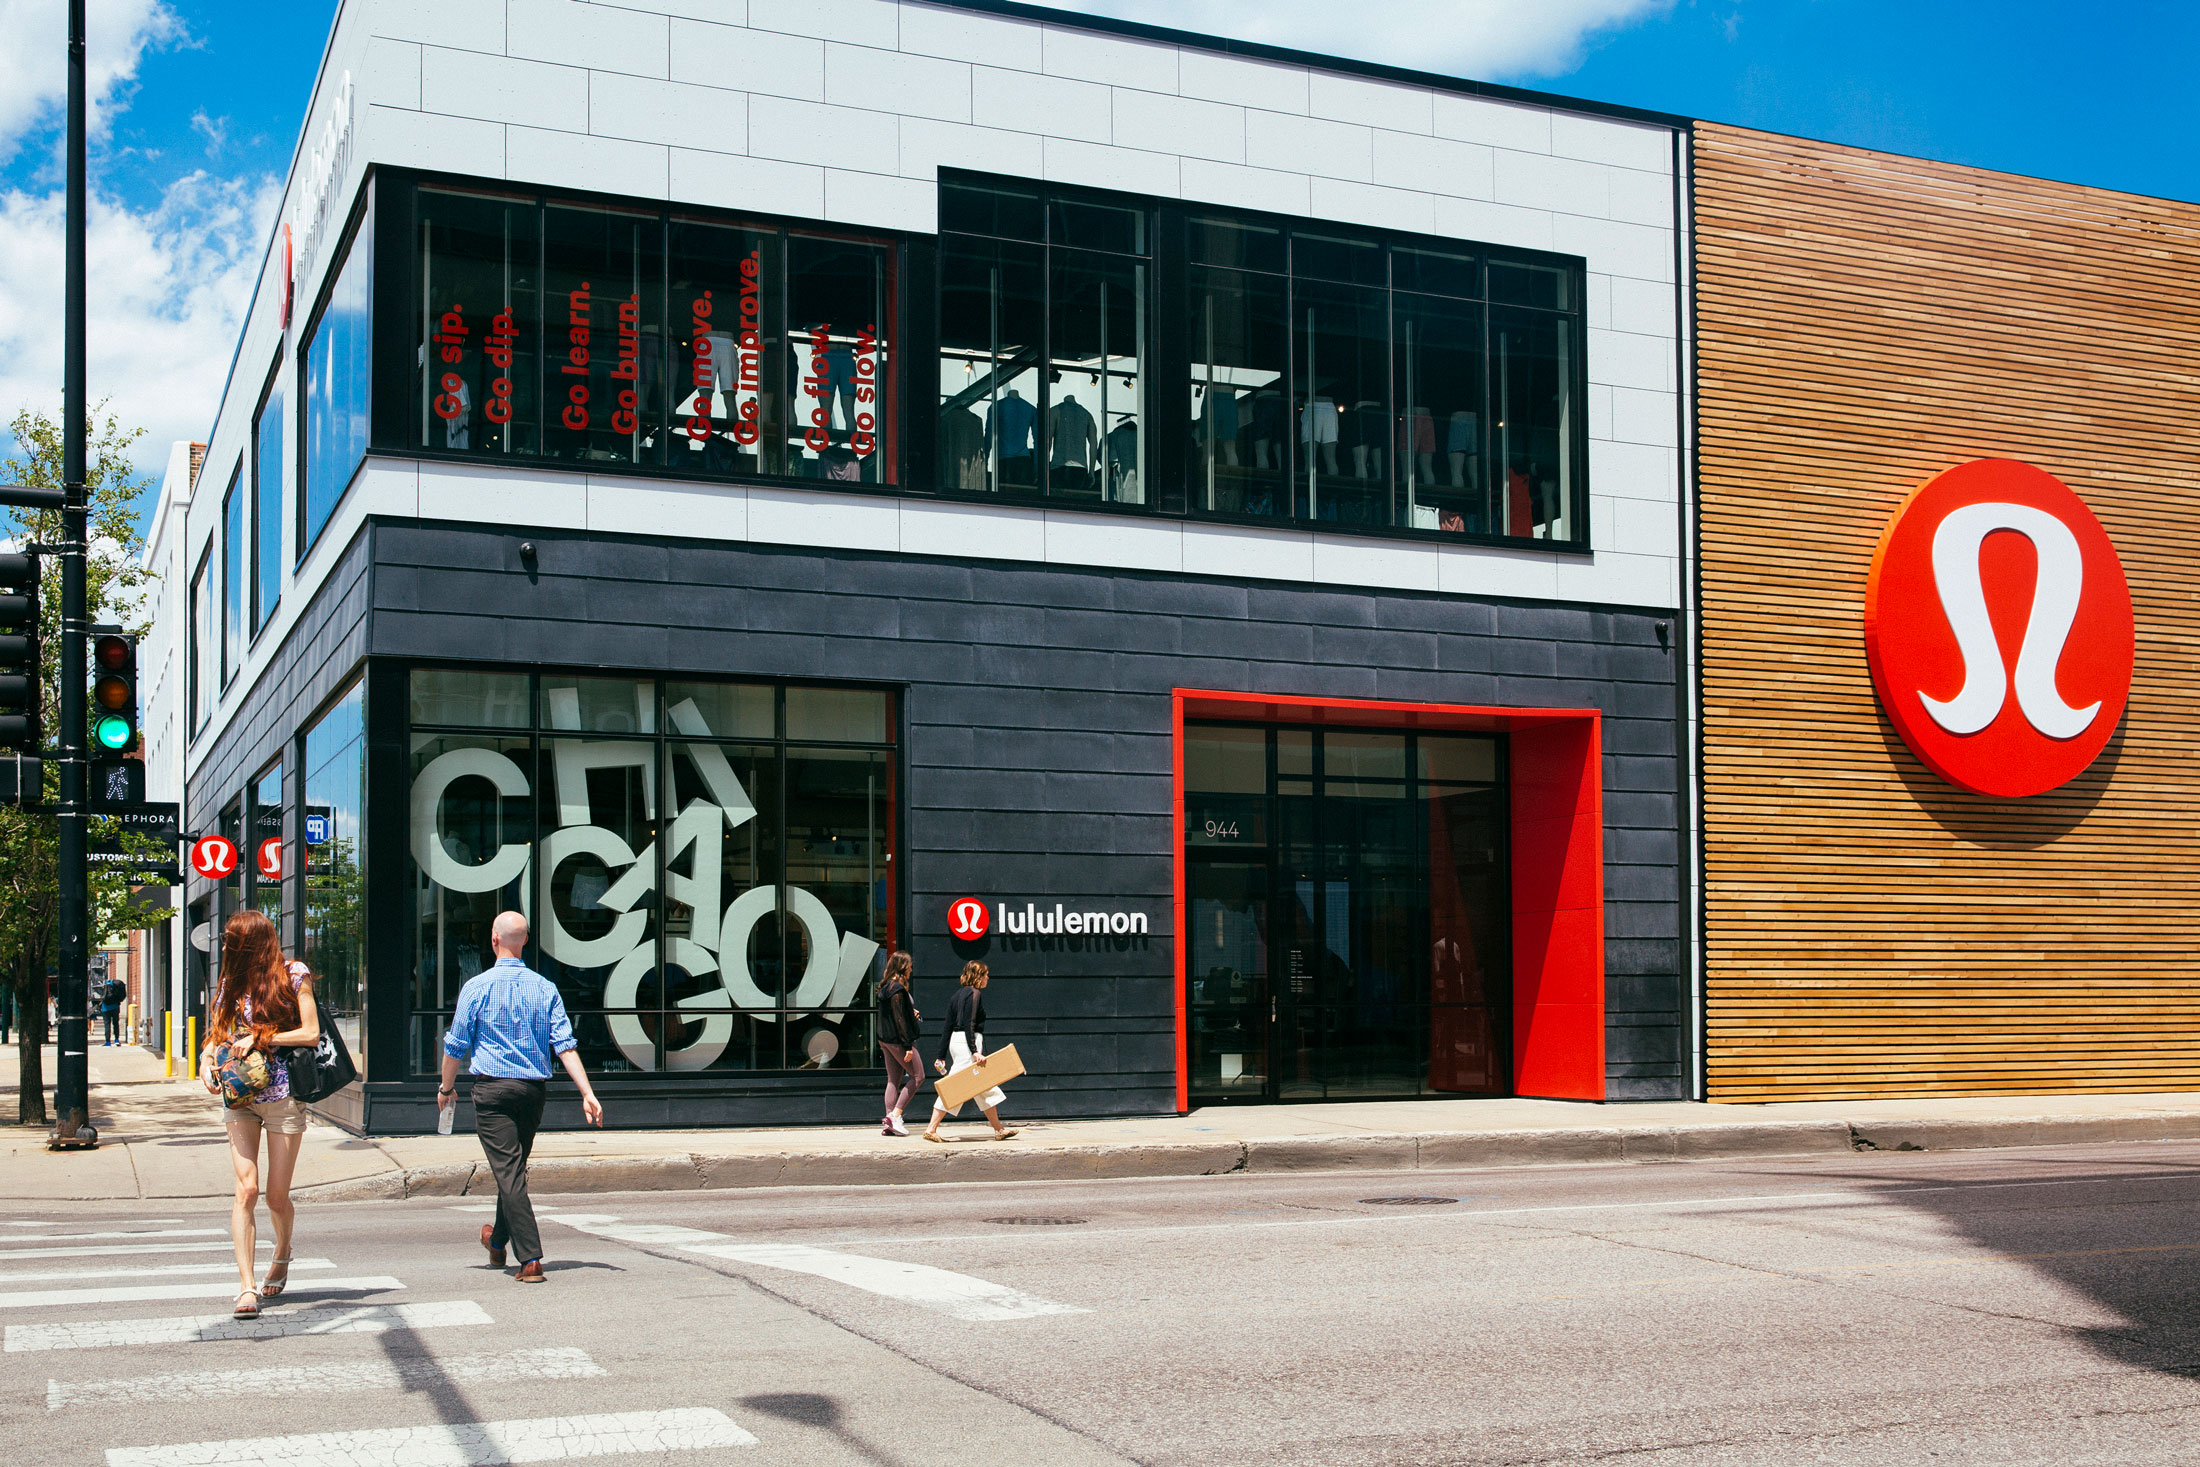 Lululemon's New Lincoln Park Store Has $25 HIIT, Yoga Classes - Bloomberg